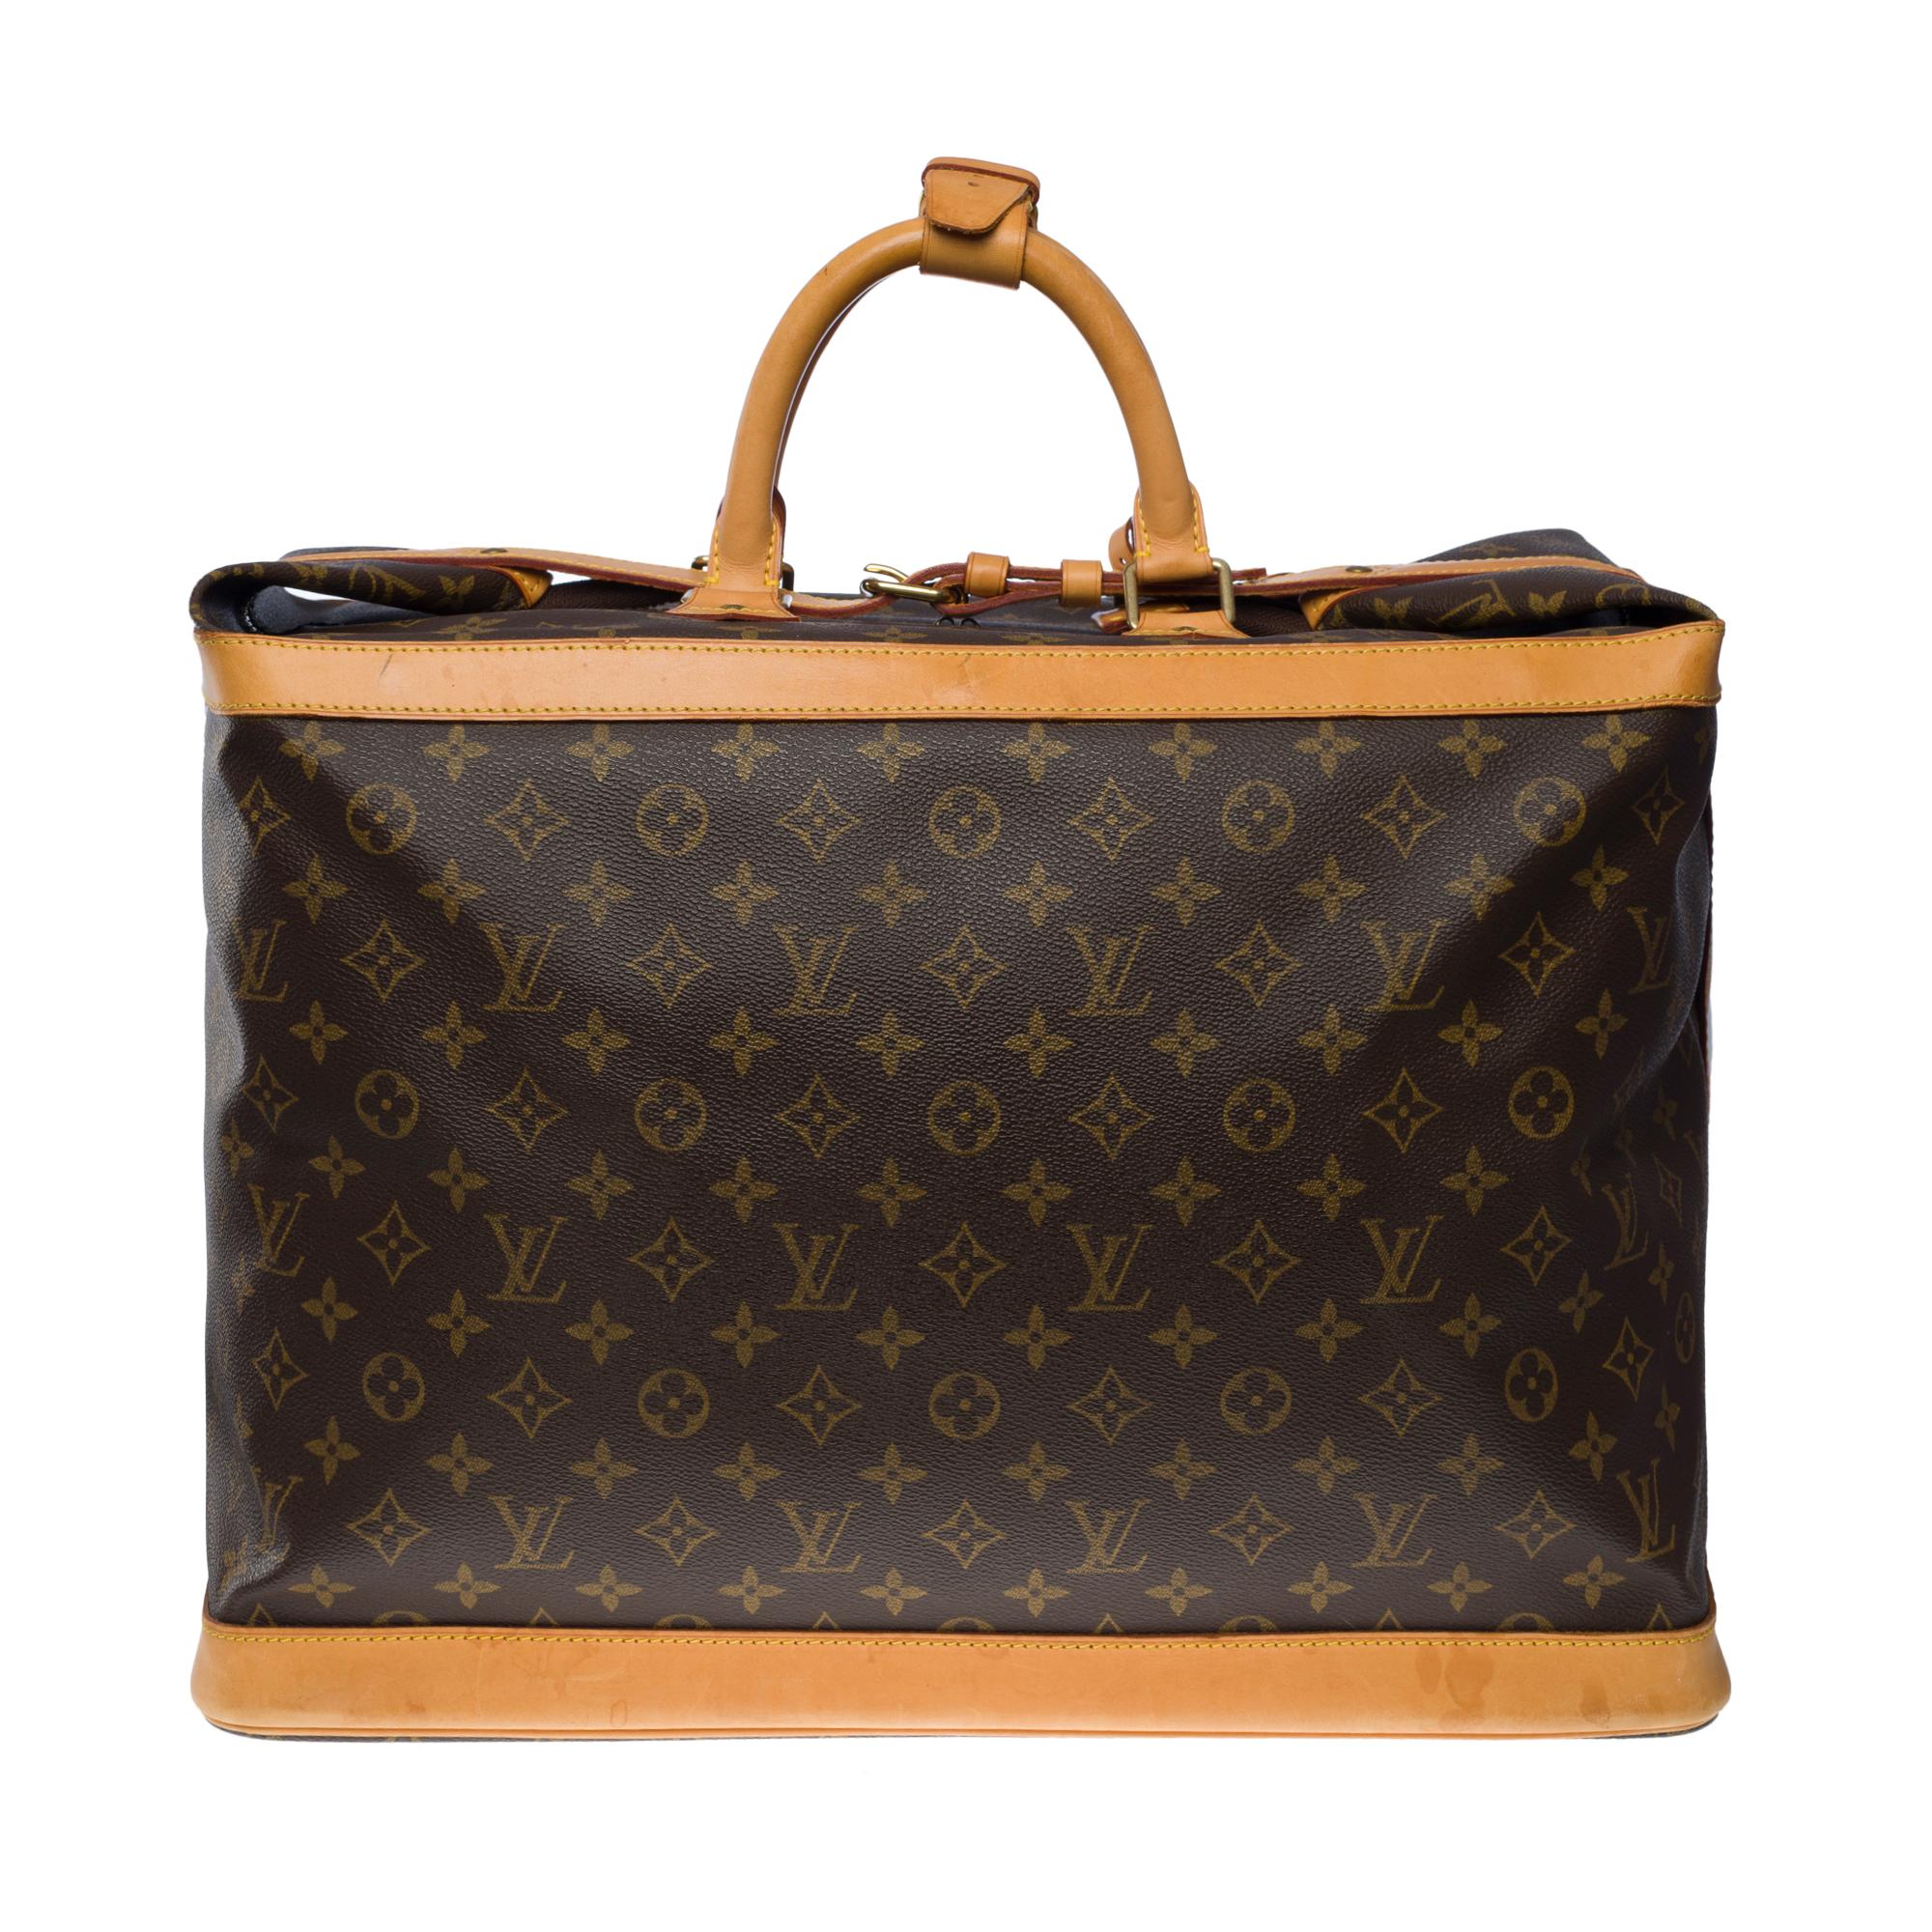 The indispensable Louis Vuitton Cruiser 45 travel bag in monogram coated canvas, gold plated metal hardware
Central zip closure on top and leather strap
Brown leather handles
Brown canvas interior
5 feet of gold metal base
Signature: 